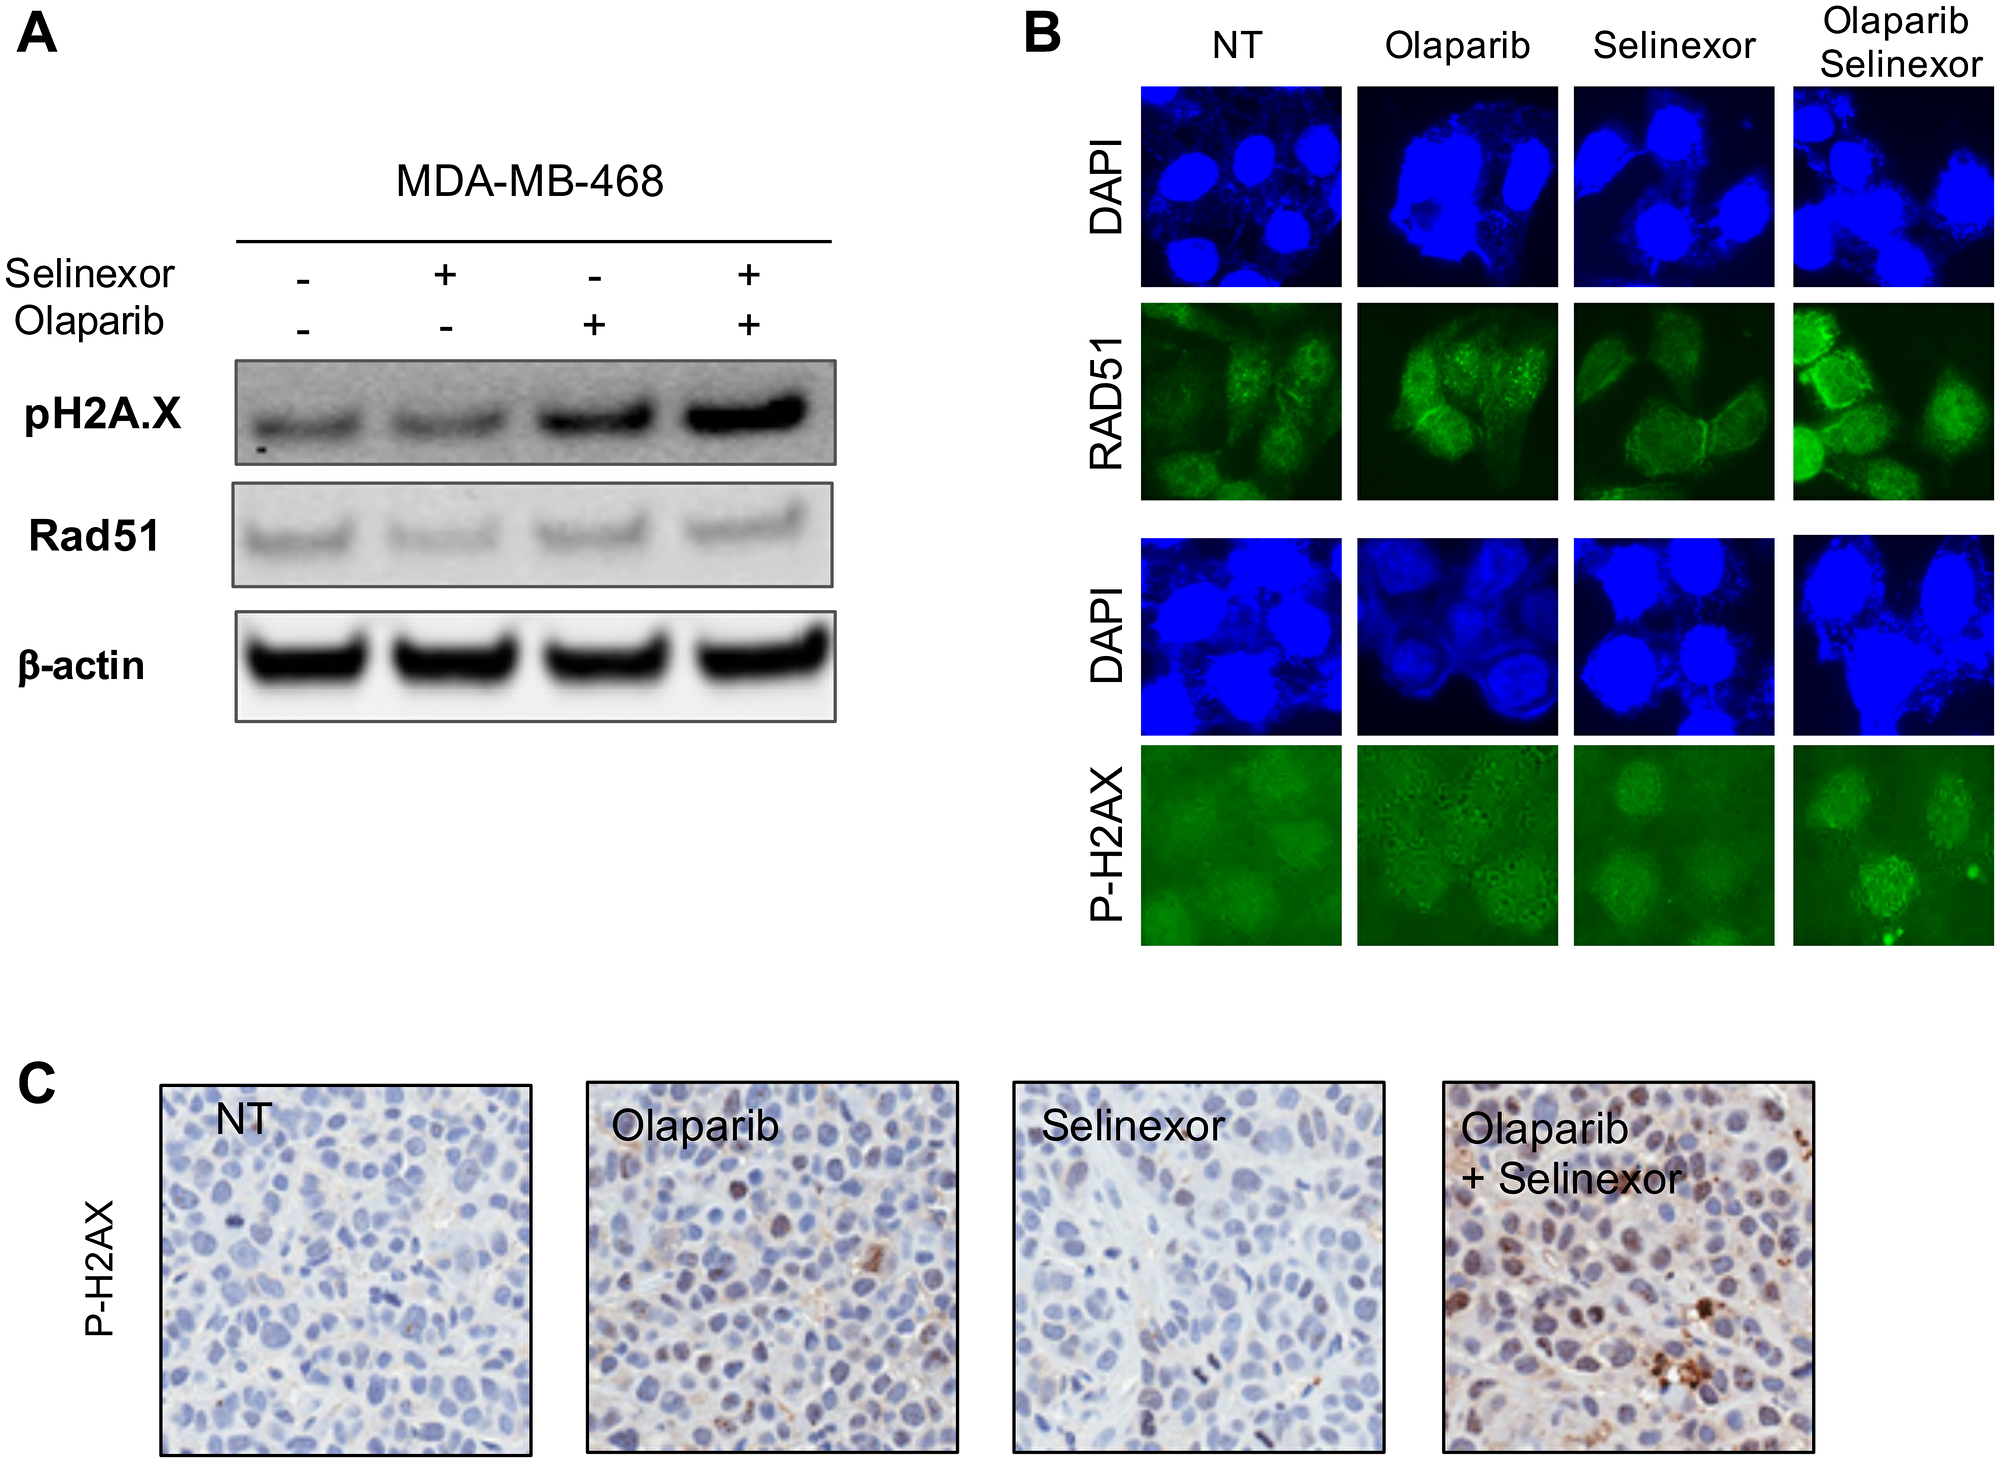 Effects of treatment with olaparib and selinexor (alone and in combination) on the homologous recombination pathway in MDA-MB-468 (BRCA1-wt TNBC cell).